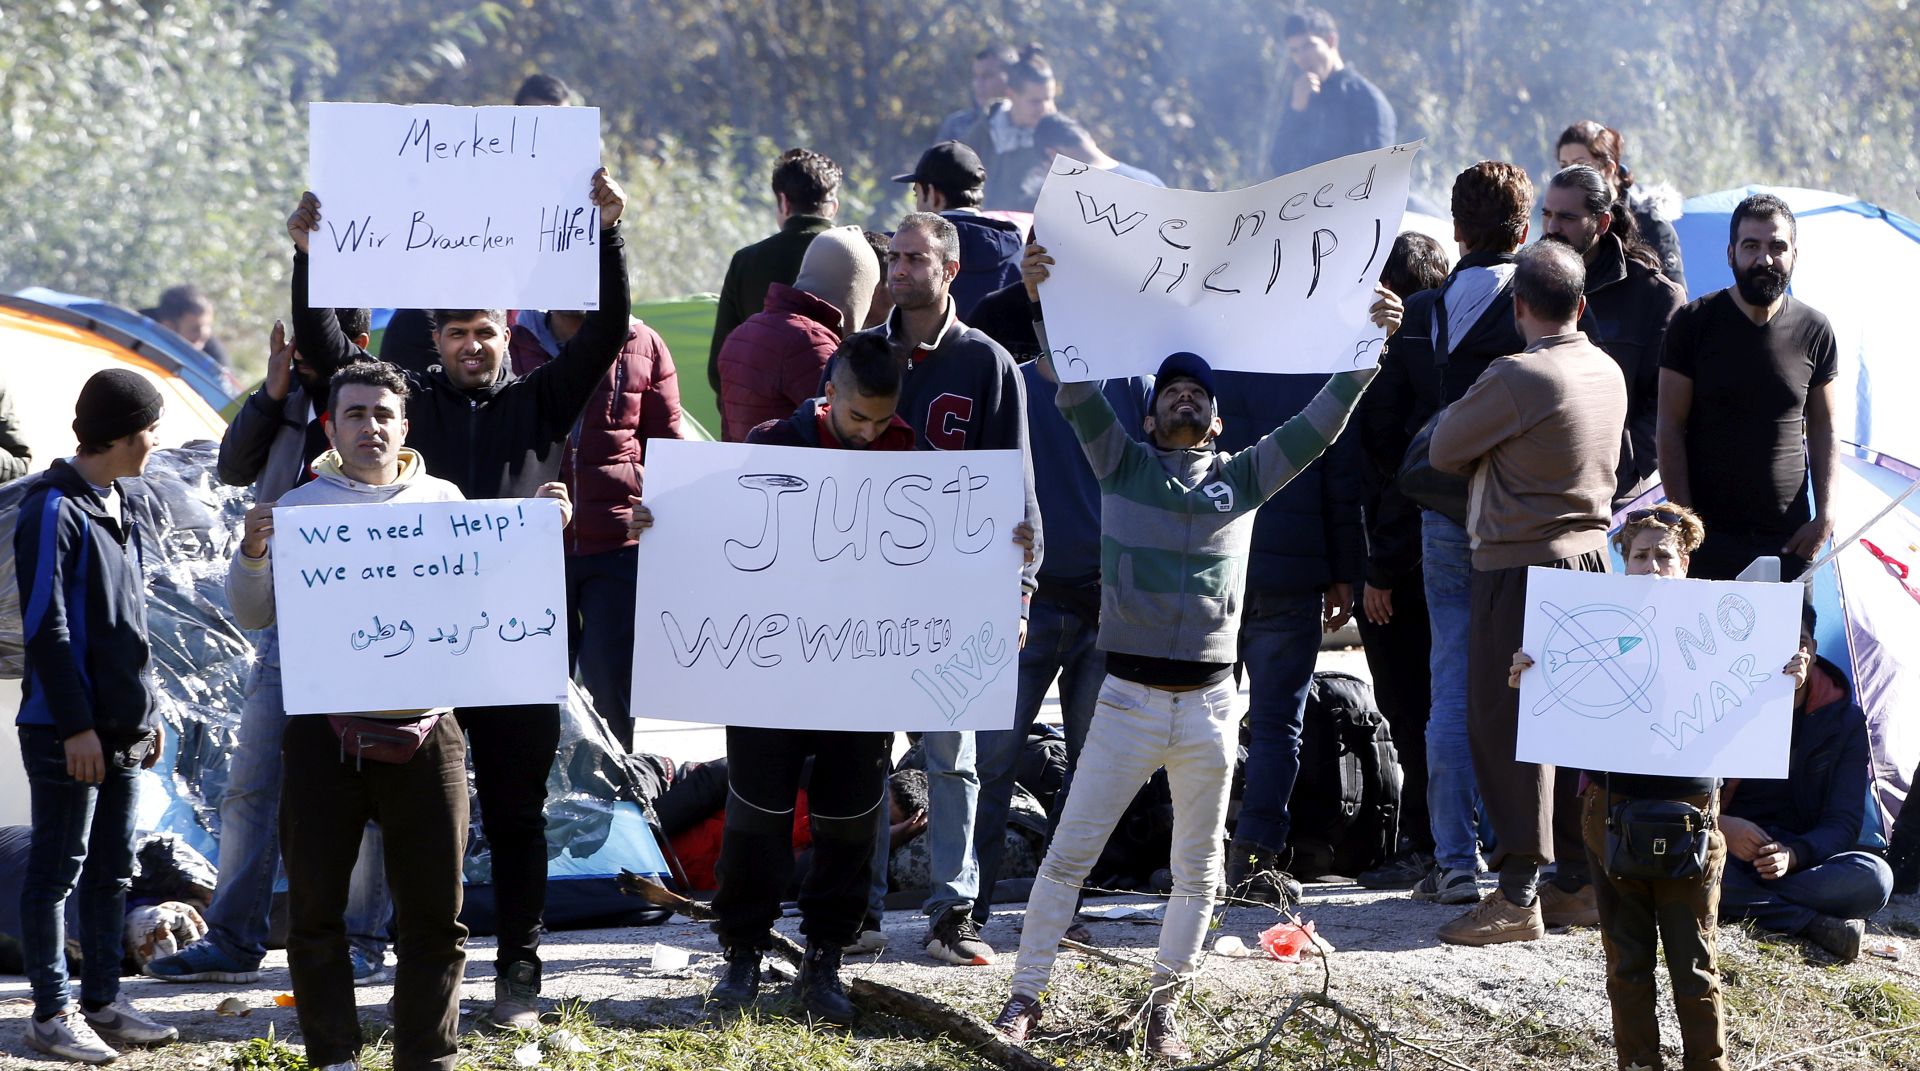 epa07119013 A group of migrants attempting to cross into Croatia hold banners as they gather near the Maljevac border crossing, Bosnia and Herzegovina, 25 October 2018. According to reports, a group of some 100 migrants mostly from Afghanistan, Pakistan, and Iraq attempting to cross into Western Europe erected tents at the border area to pressure neighboring Croatia to open border and let them travel north. Thousands of migrants and refugees fleeing wars and poverty in Asia and North Africa are sleeping rough in impoverished Bosnia, and many are growing concerned about the onset of cold winter weather and a lack of adequate shelters.  EPA/FEHIM DEMIR